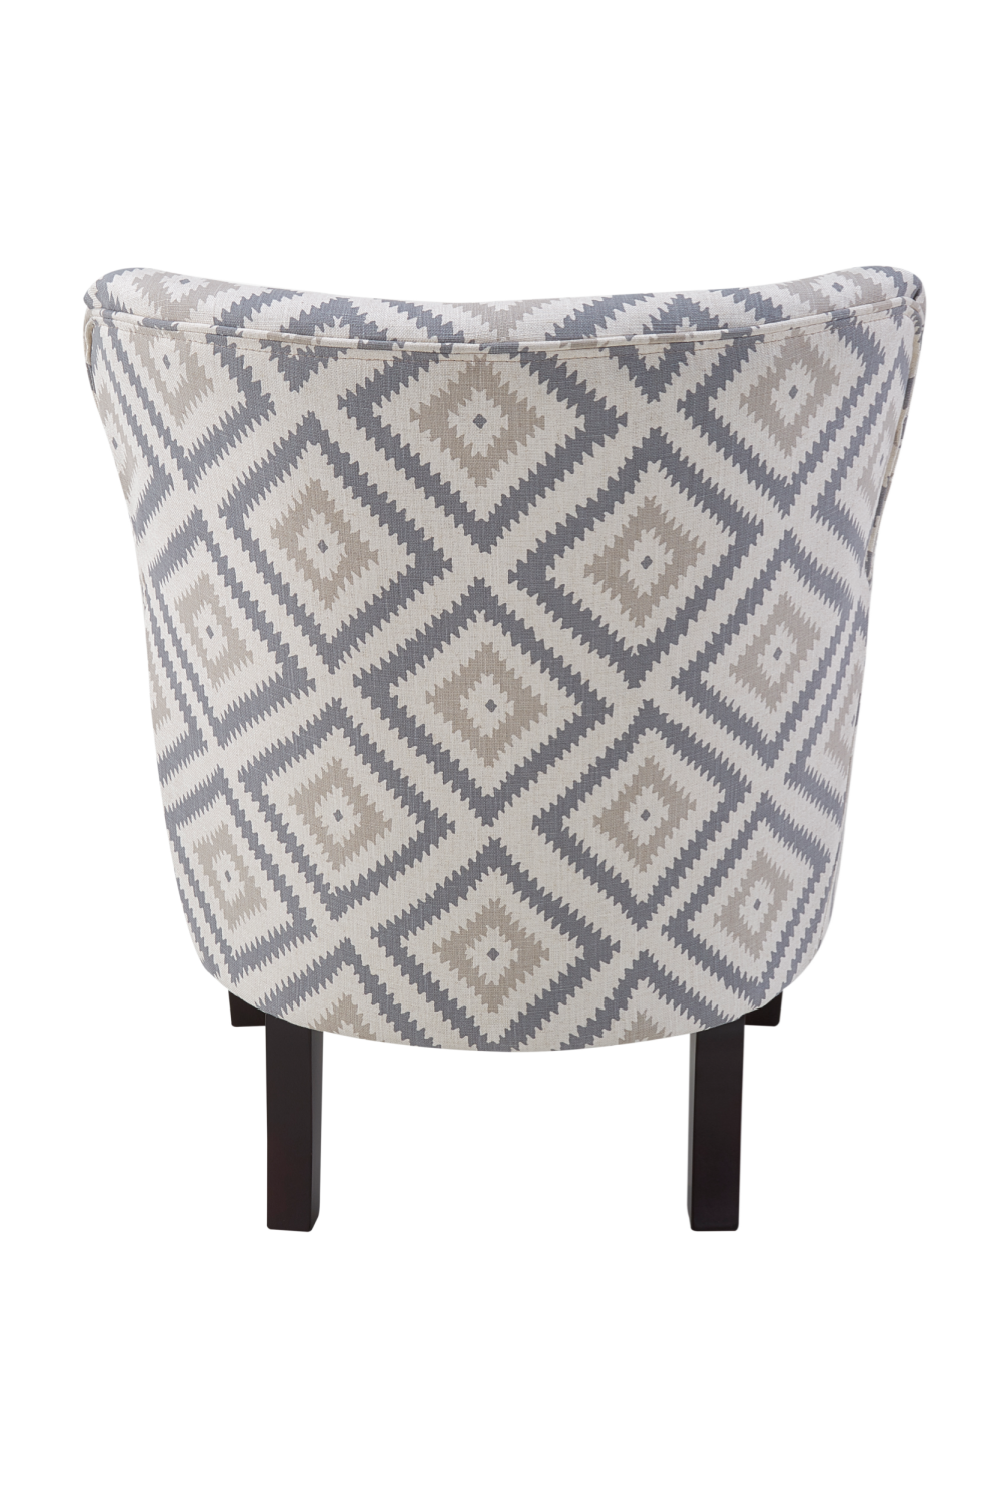 Gray Geometric Upholstered Accent Armchair | Andrew Martin | OROA